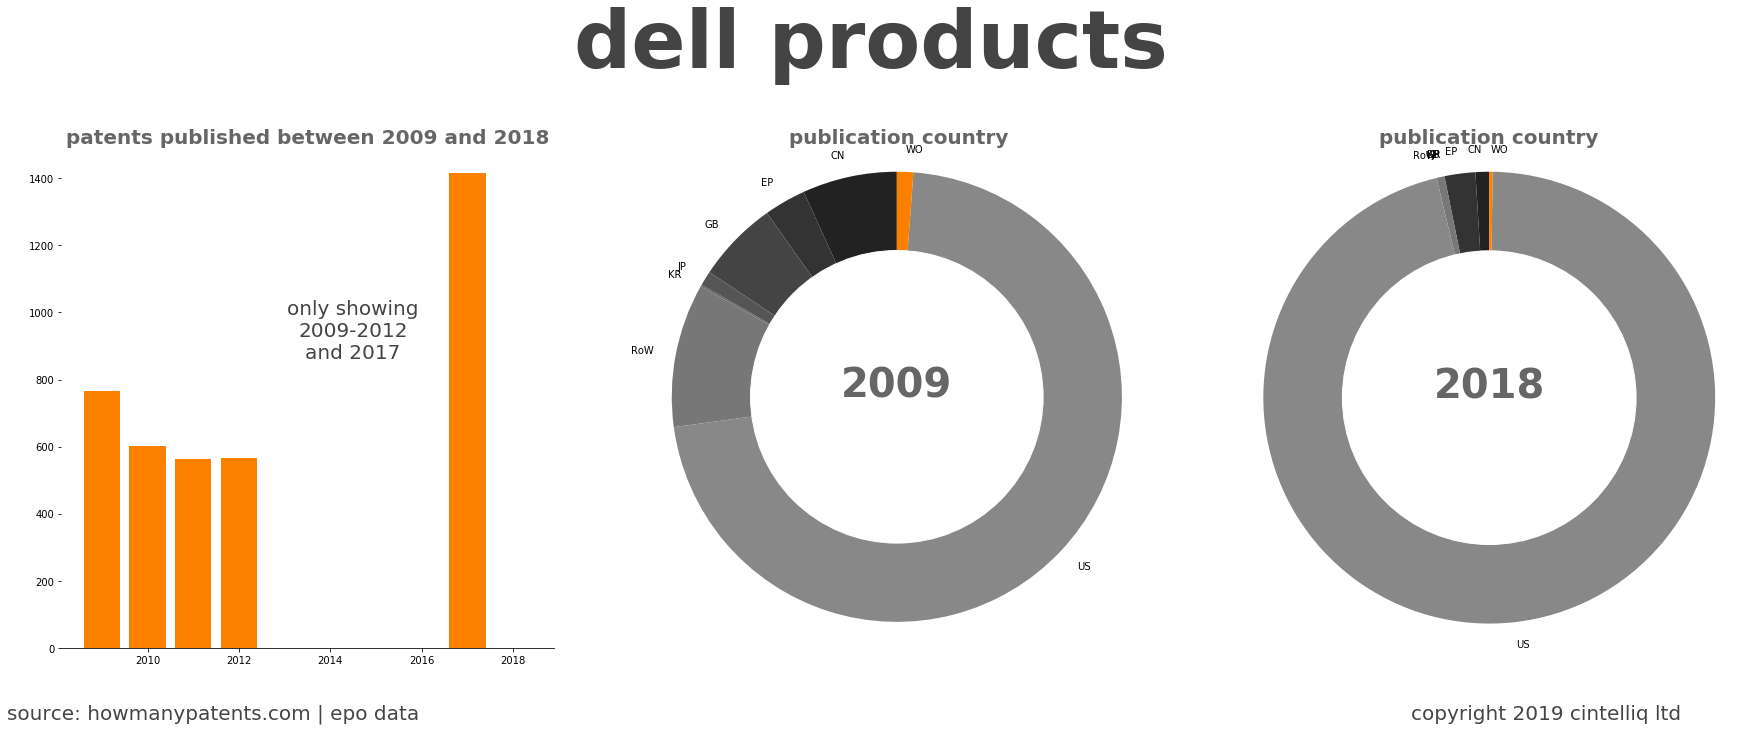 summary of patents for Dell Products